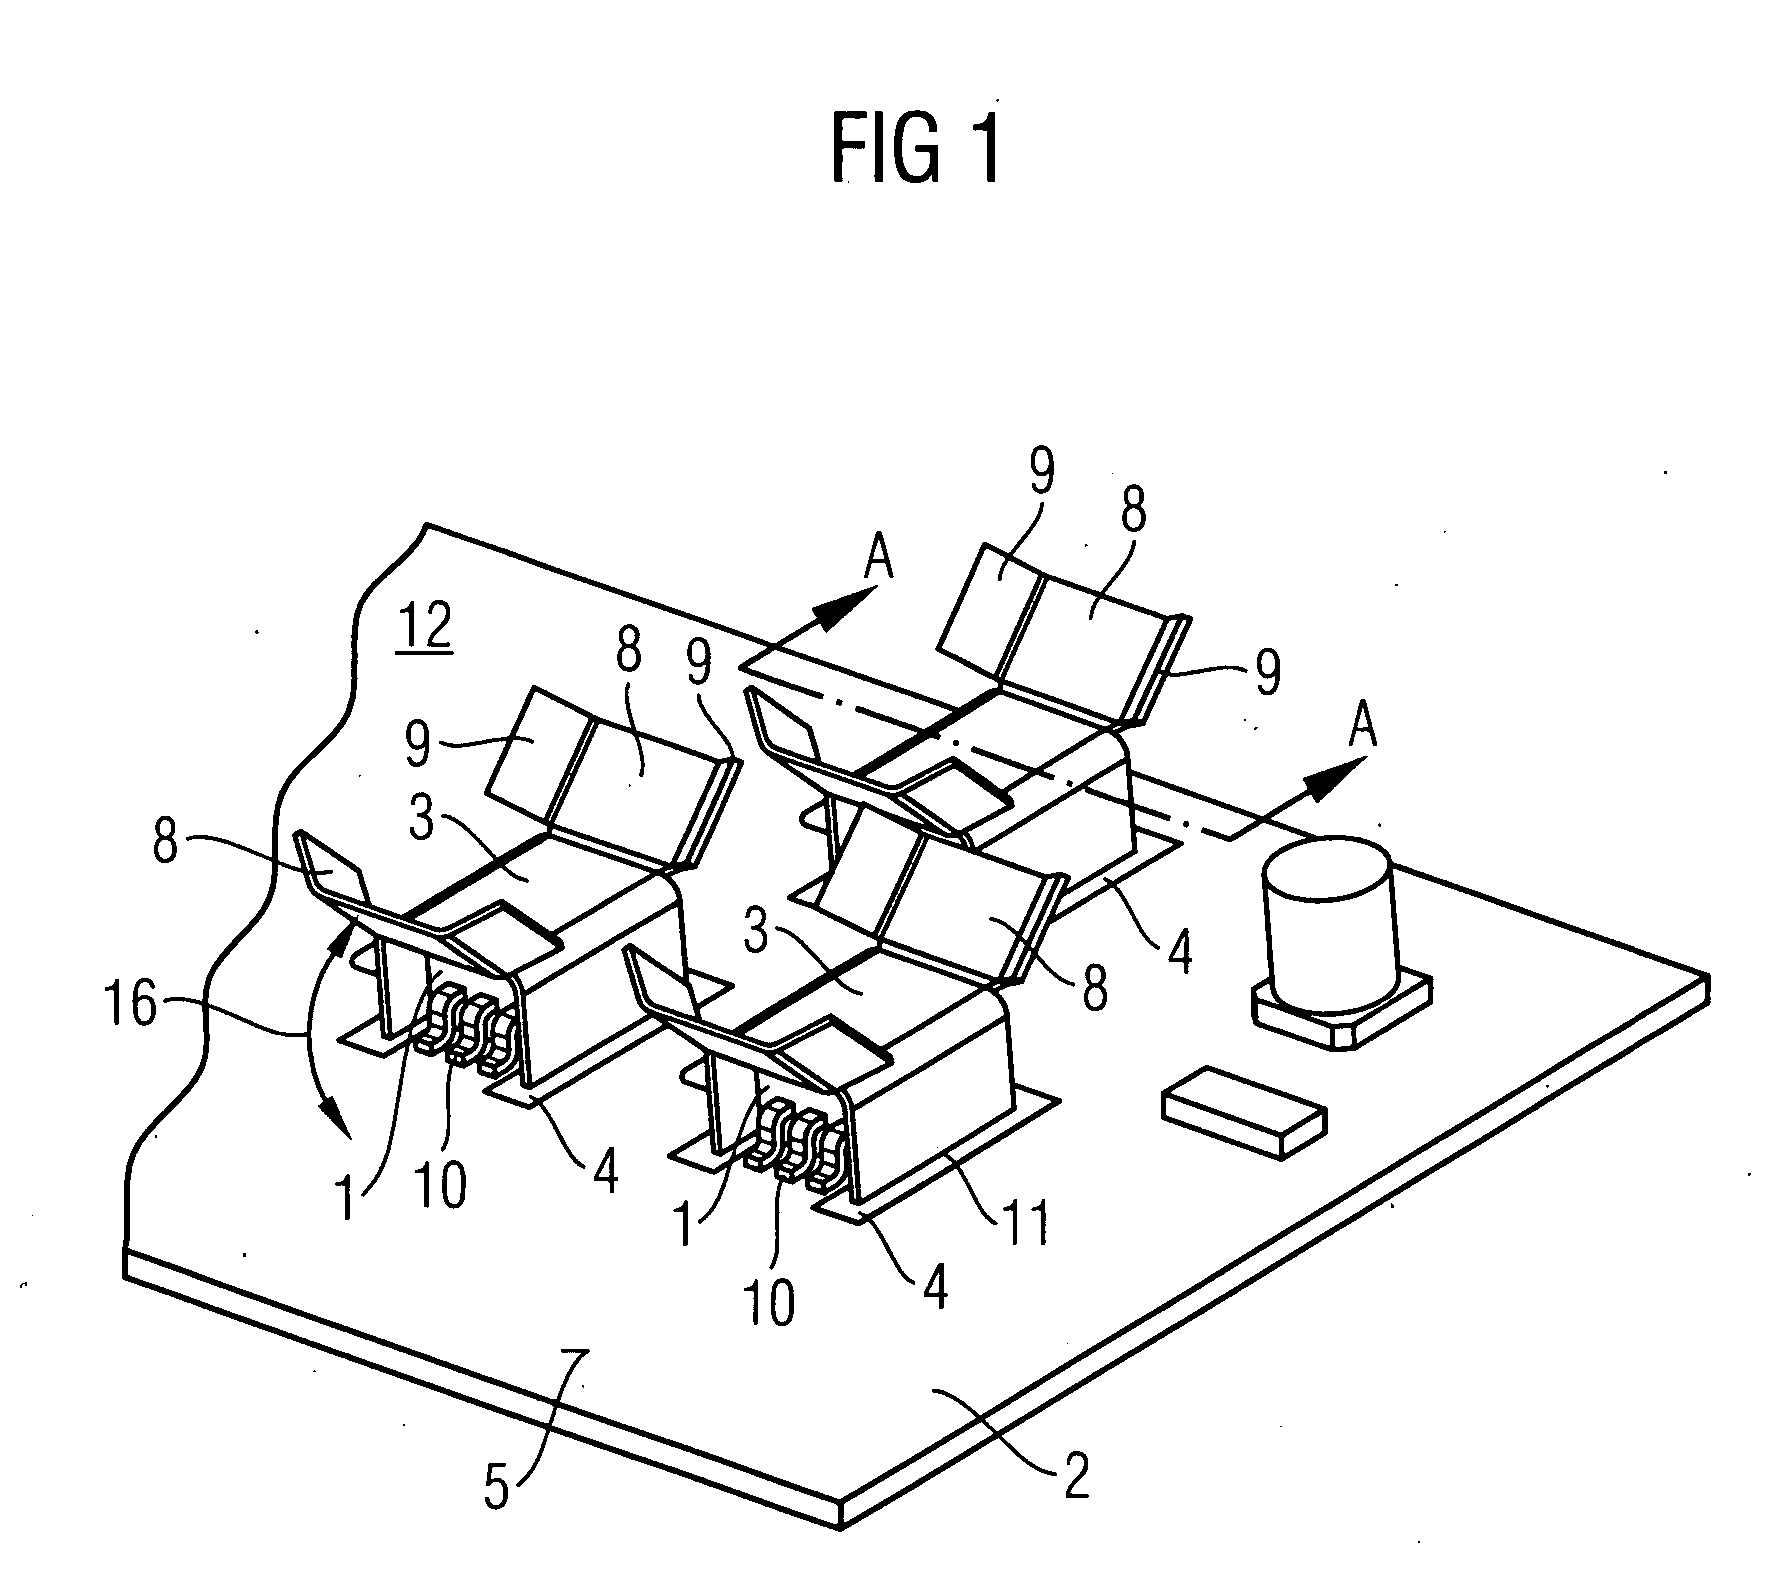 Arrangement for cooling SMD power components on a printed circuit board